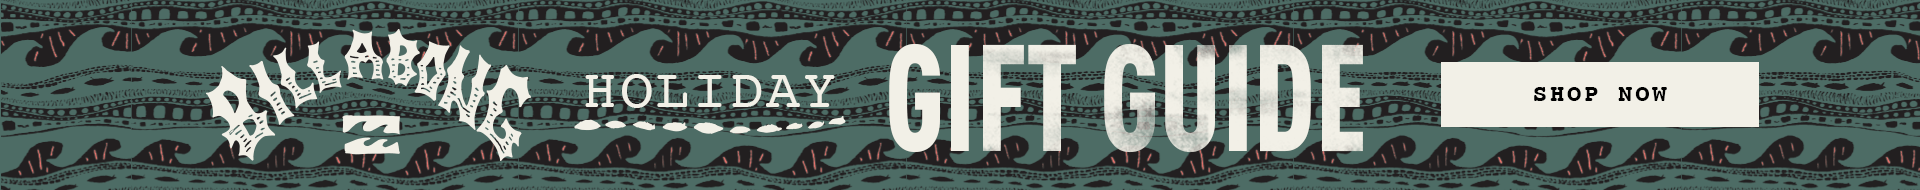 Billabong Holiday Gift Guide For All